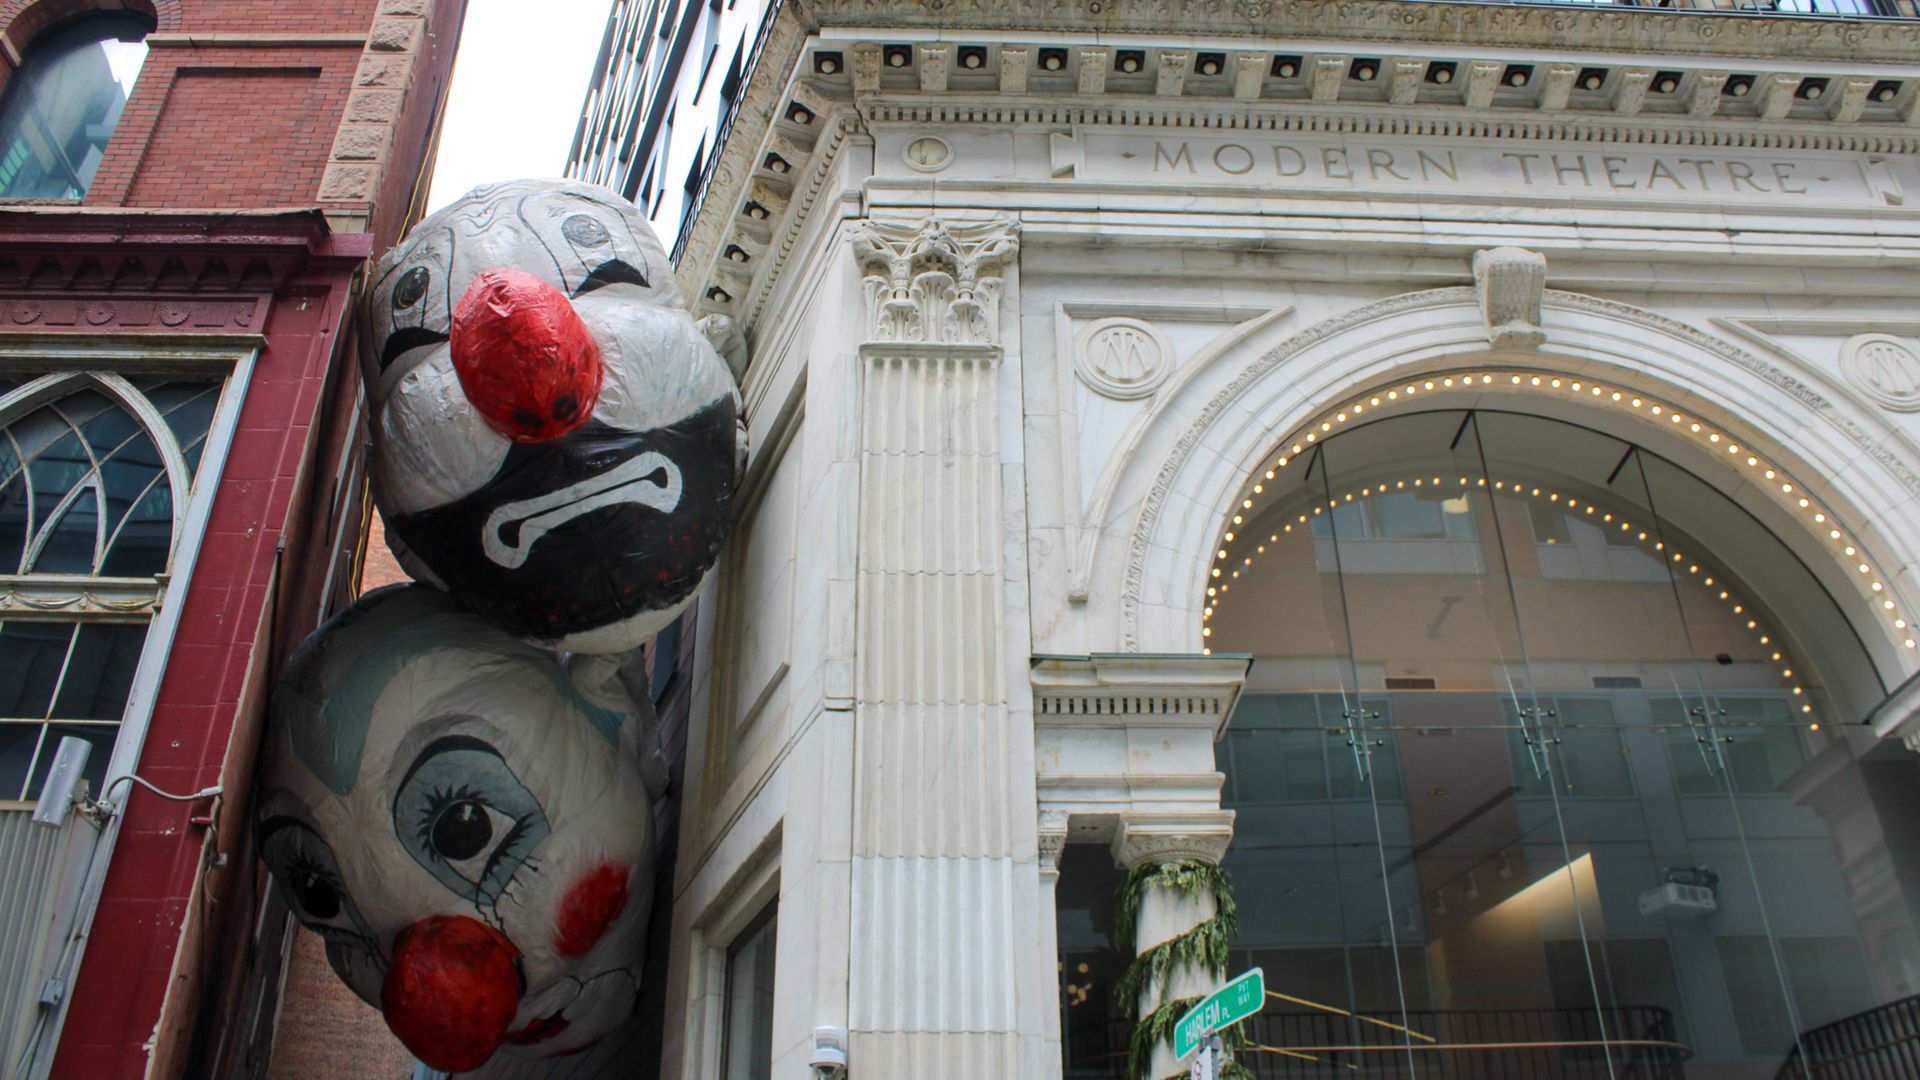 "End Game," an art installation featuring two massive floating clown heads, hovers between the Modern Theatre and the building nextdoor in downtown Boston. It's part of an art series called "Winteractive" led by the Boston Business Improvement District.